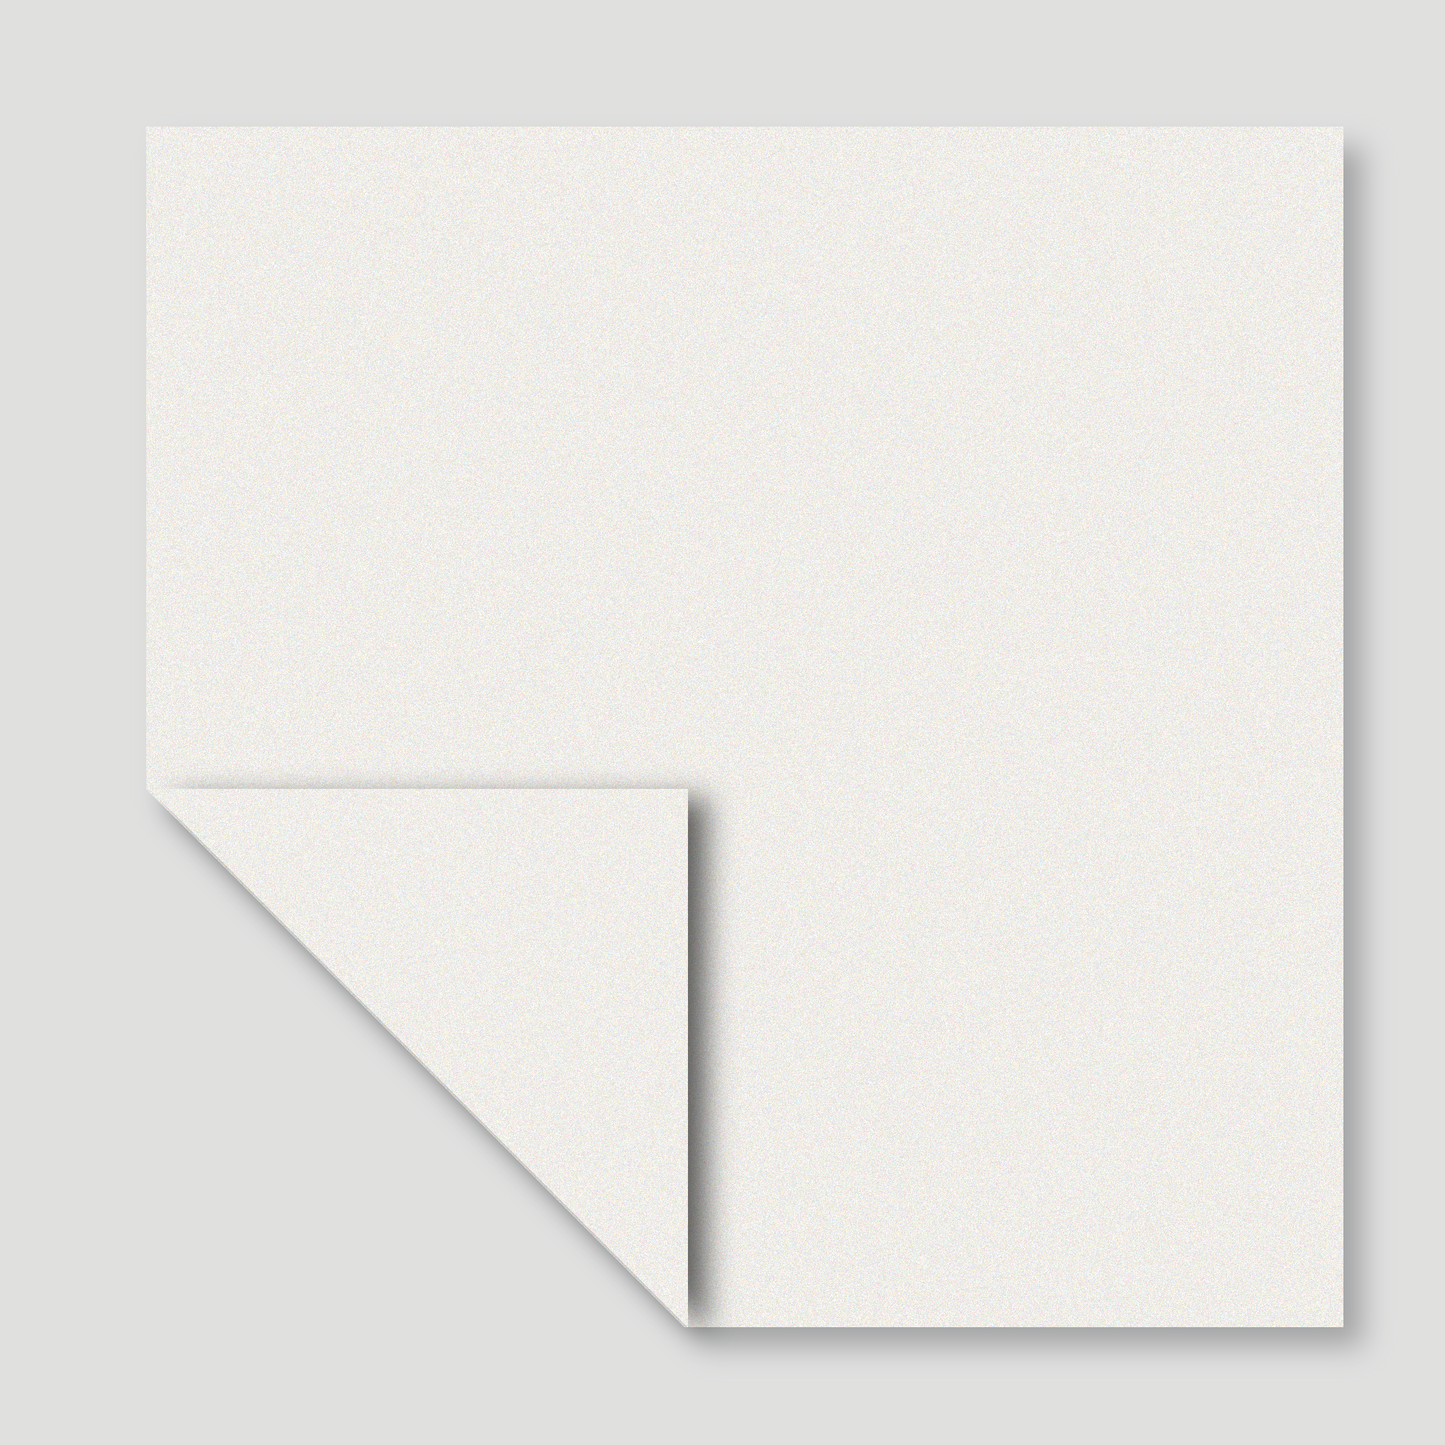 [Taro's Origami Studio] Biotope Jumbo 13.75 Inch / 35cm Single Color (Cotton White) 10 Sheets (All Same Color) Premium Japanese Paper for Advanced Folders (Made in Japan)